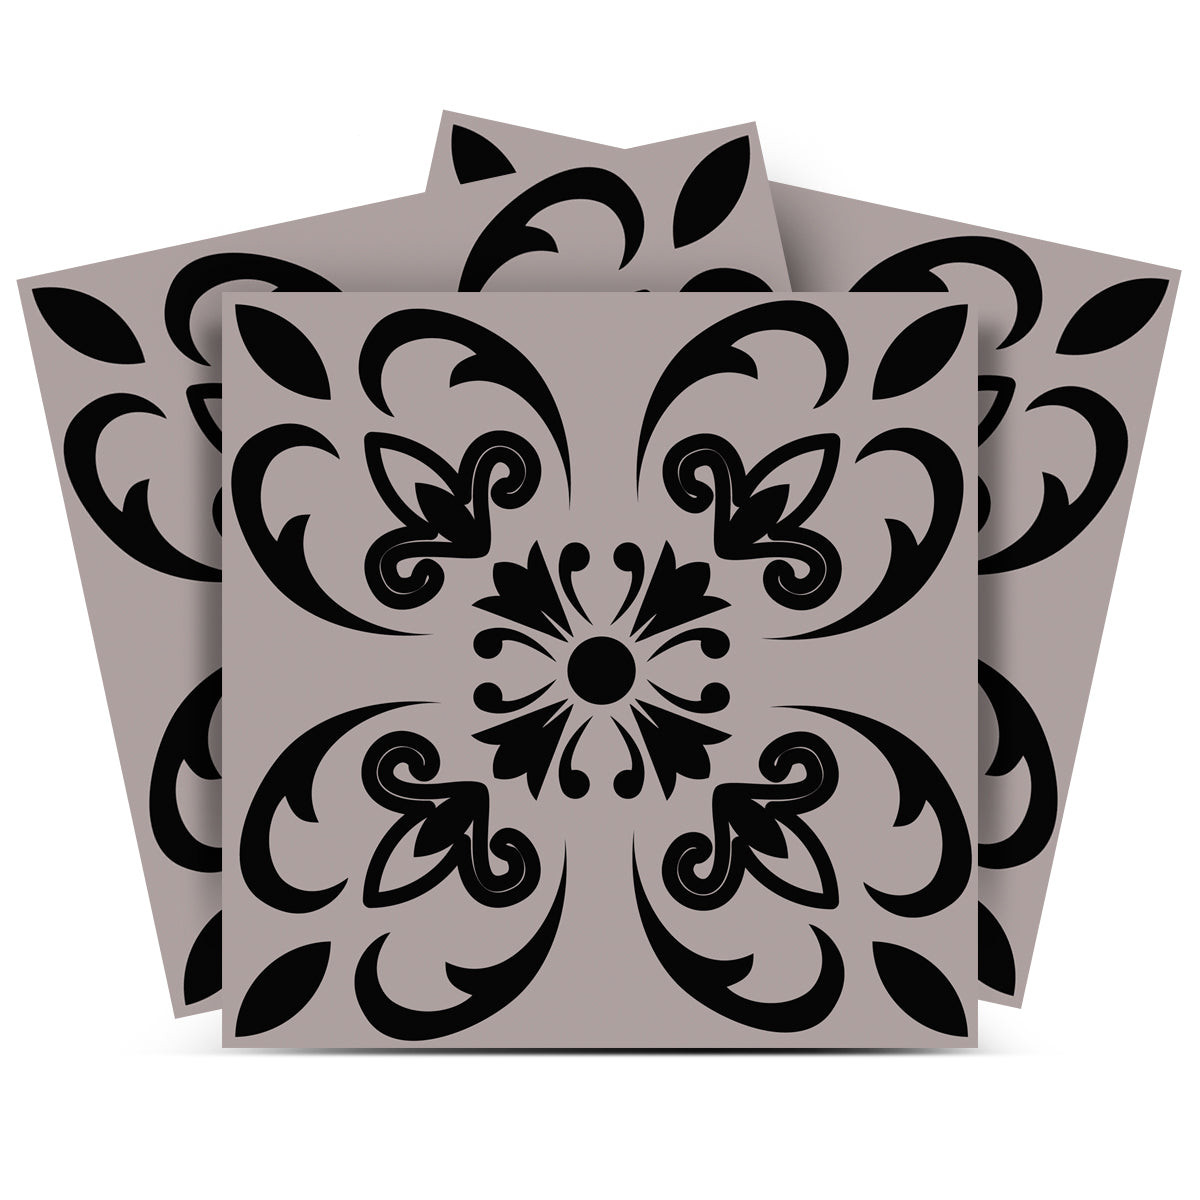 4" X 4" Black And White Orchid Peel And Stick Removable Tiles-390778-1